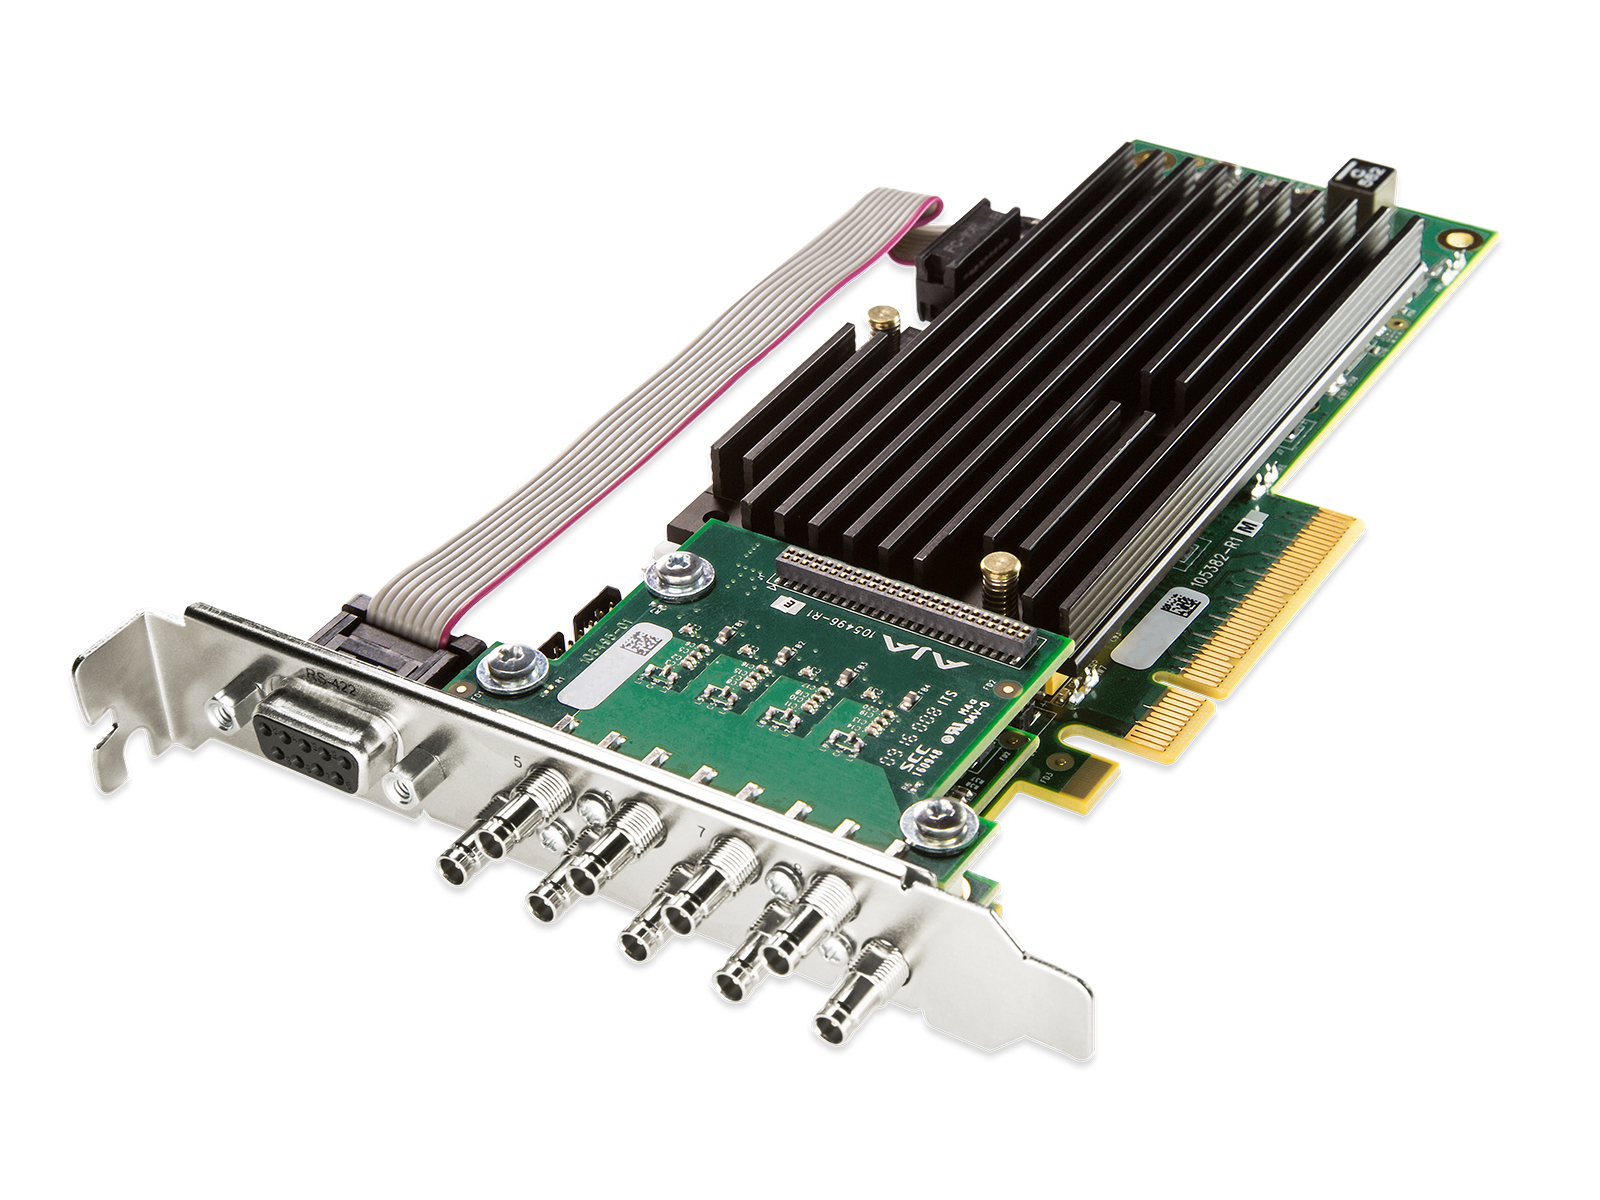 CRV88-9-T-NF Corvid 88 with Standard Profile PCIe Bracket and Passive Heat Sink/Includes 5x 101999-02 Cables by AJA